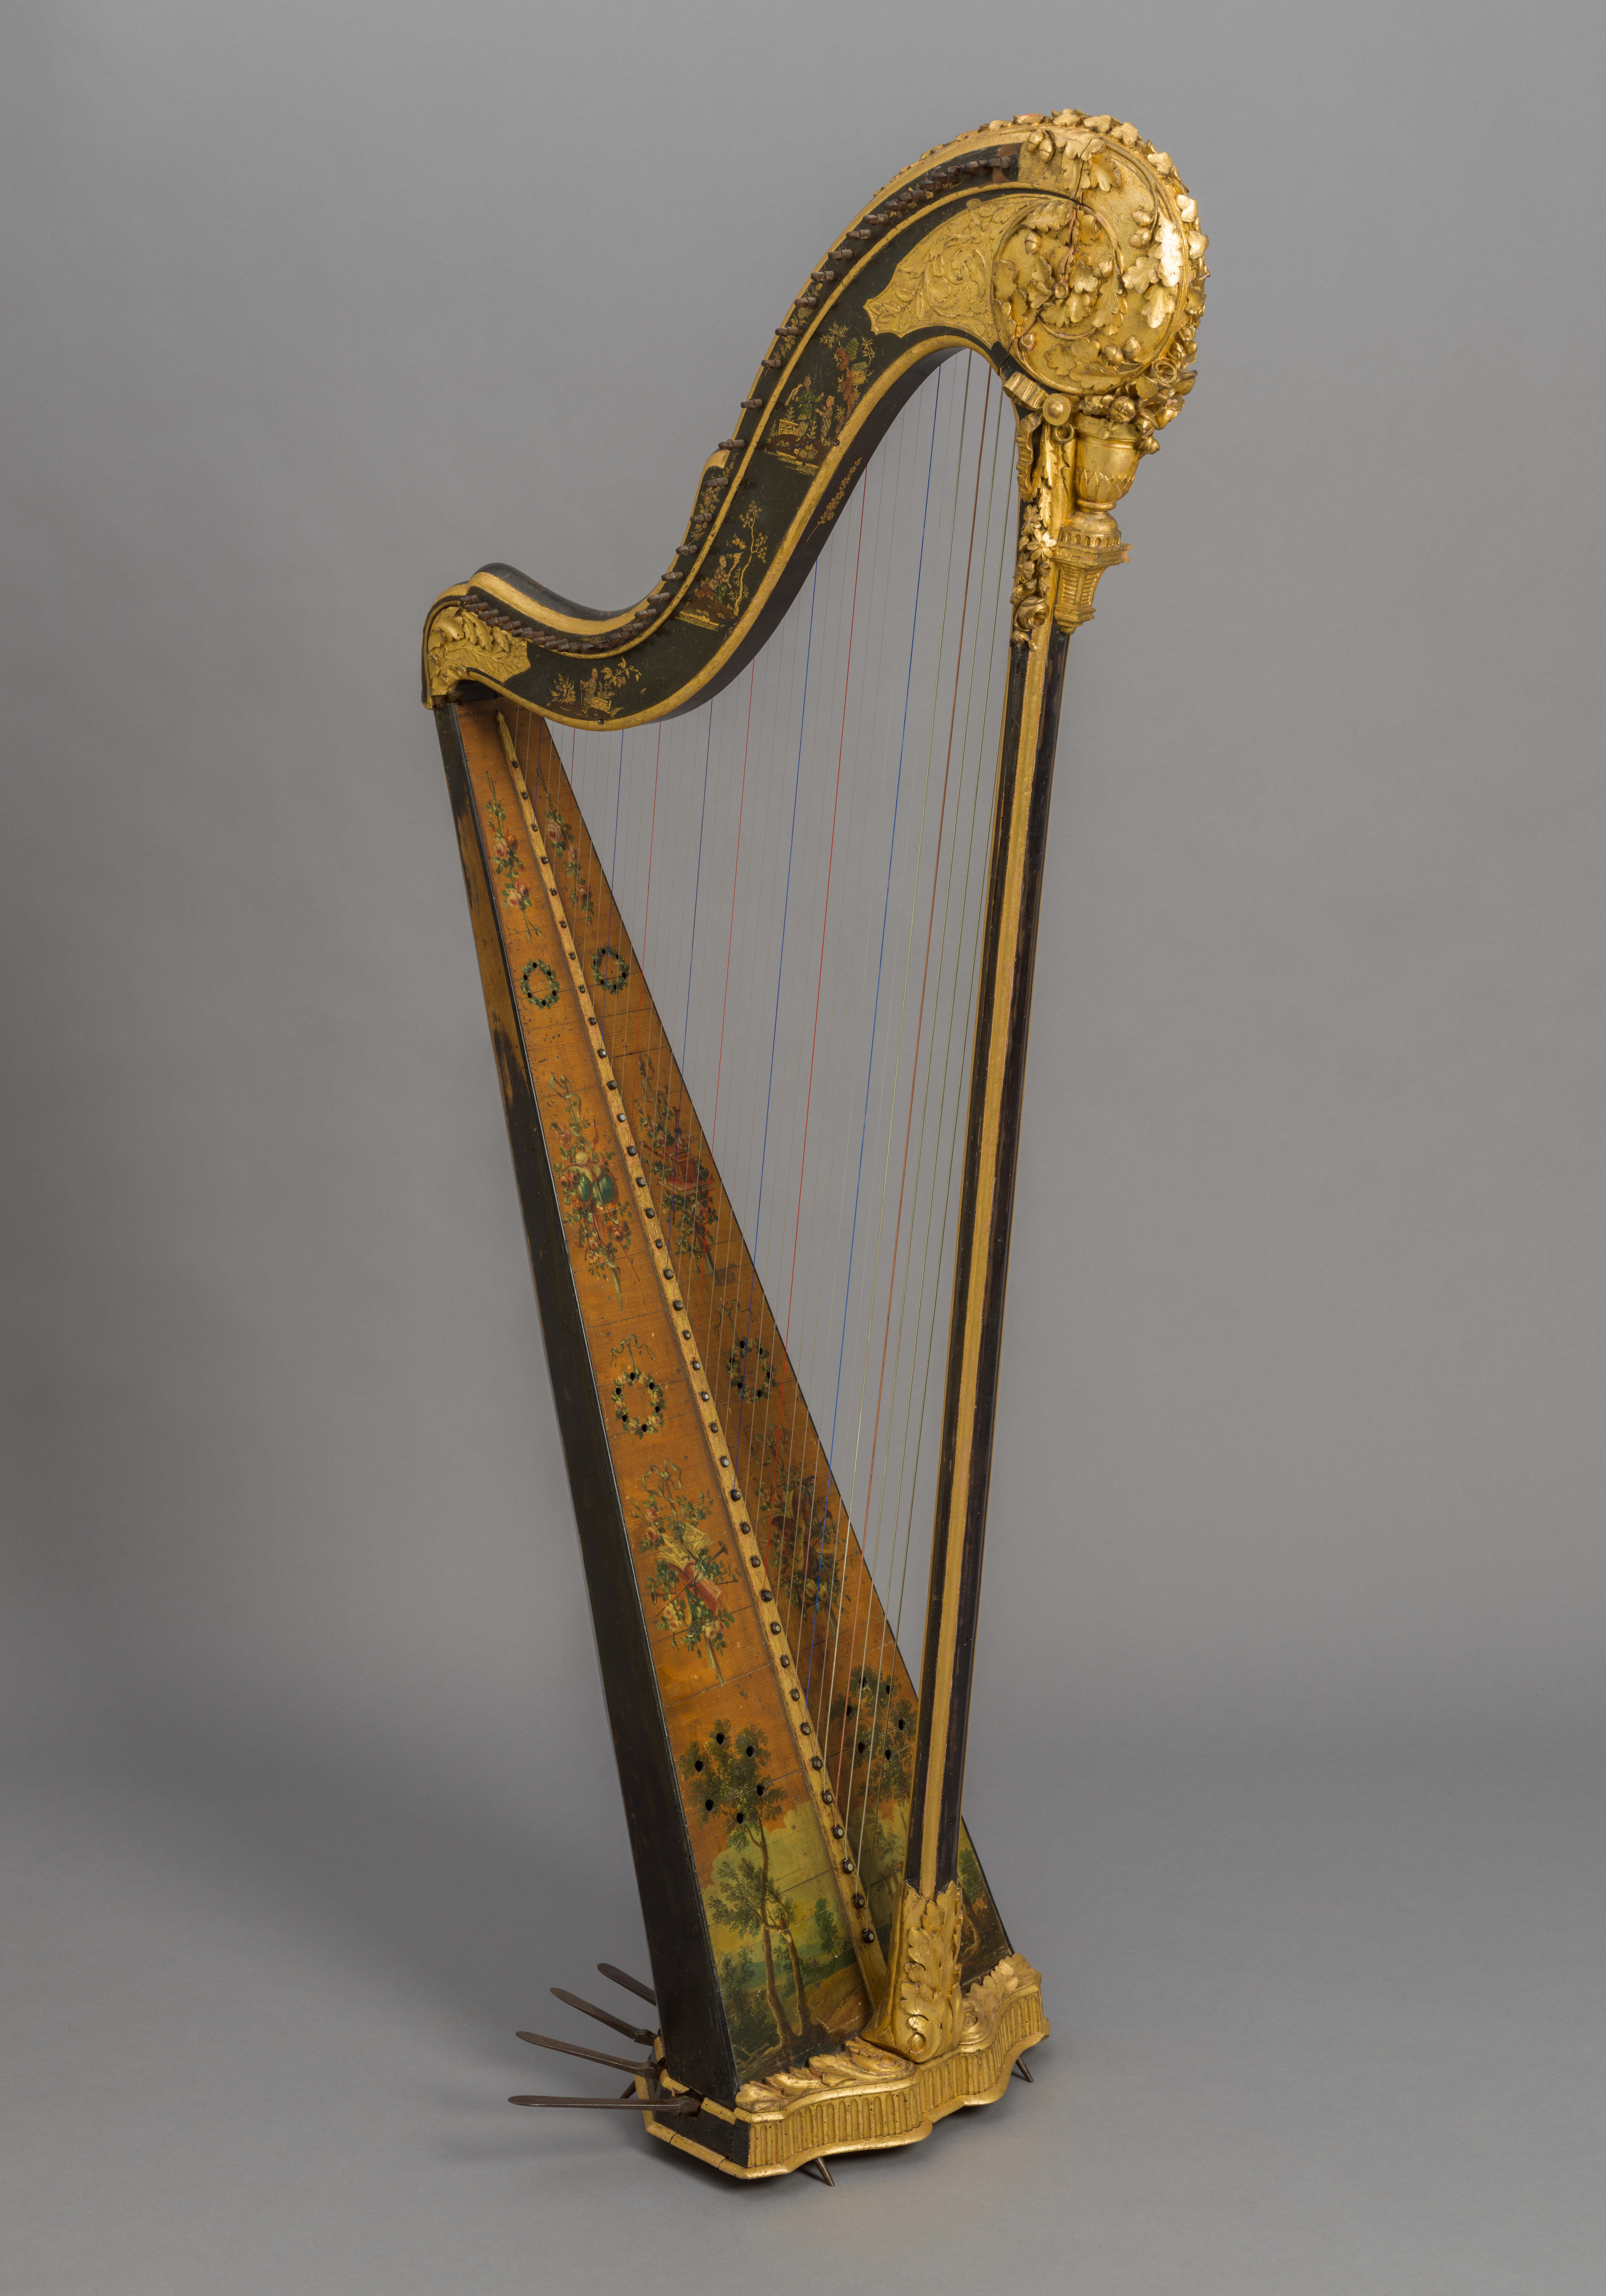 Harp, Godefroy Holtzman, Paris, France, circa 1770-1790. Spruce, hardwoods, iron, gut, paint and gilding. Gift of Jonathan and Susan Beers, 2013-35,A 